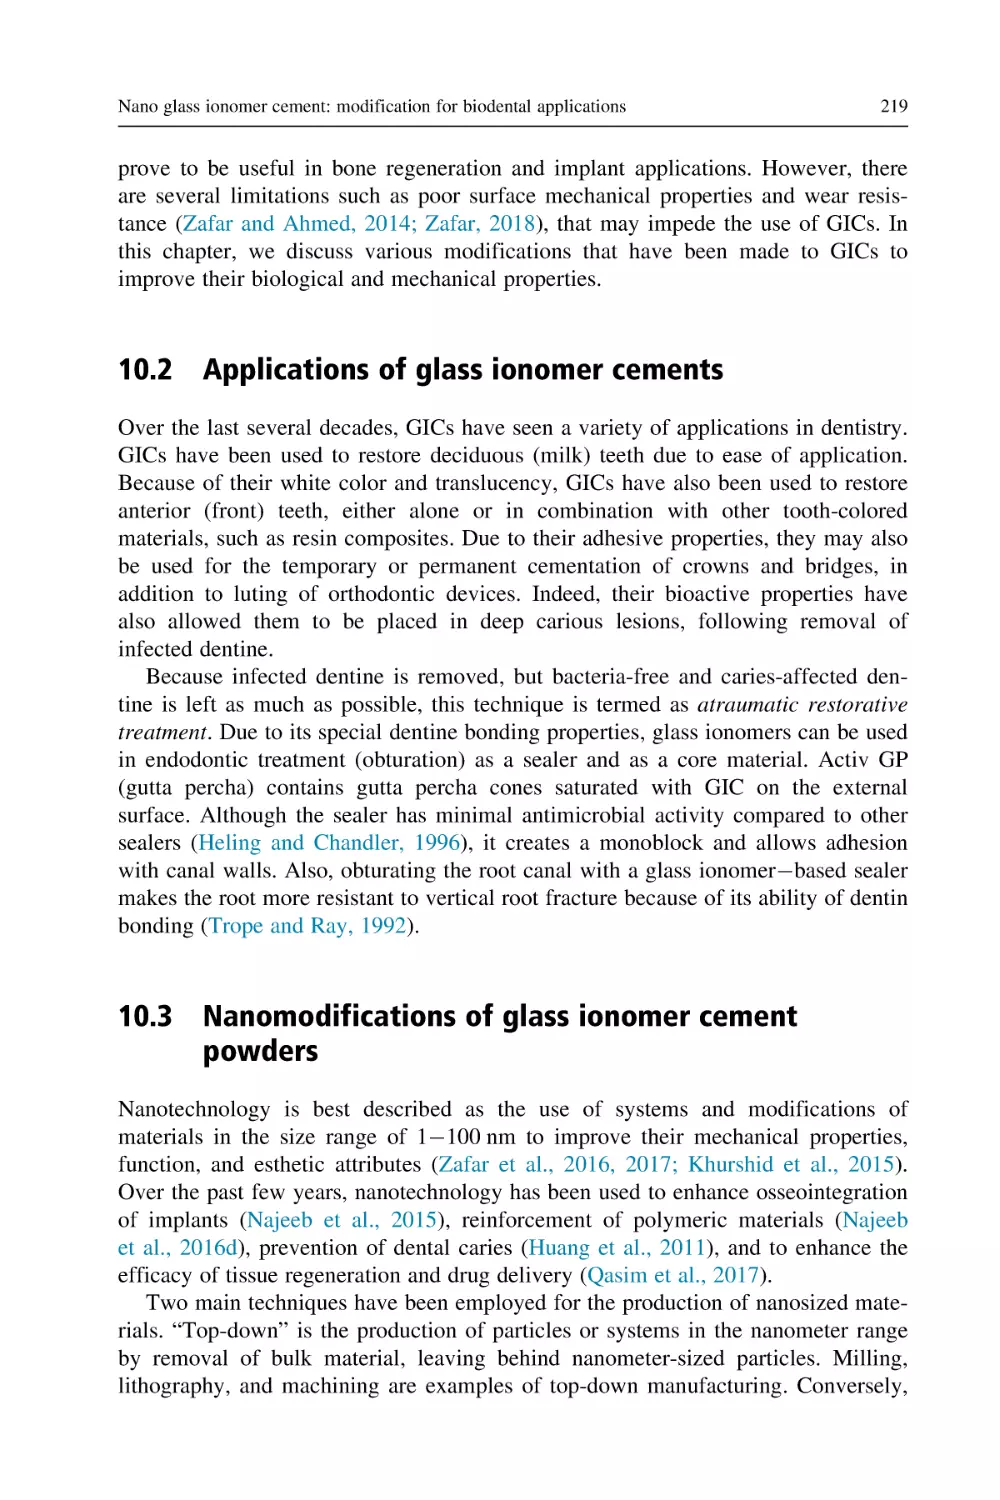 10.2 Applications of glass ionomer cements
10.3 Nanomodifications of glass ionomer cement powders